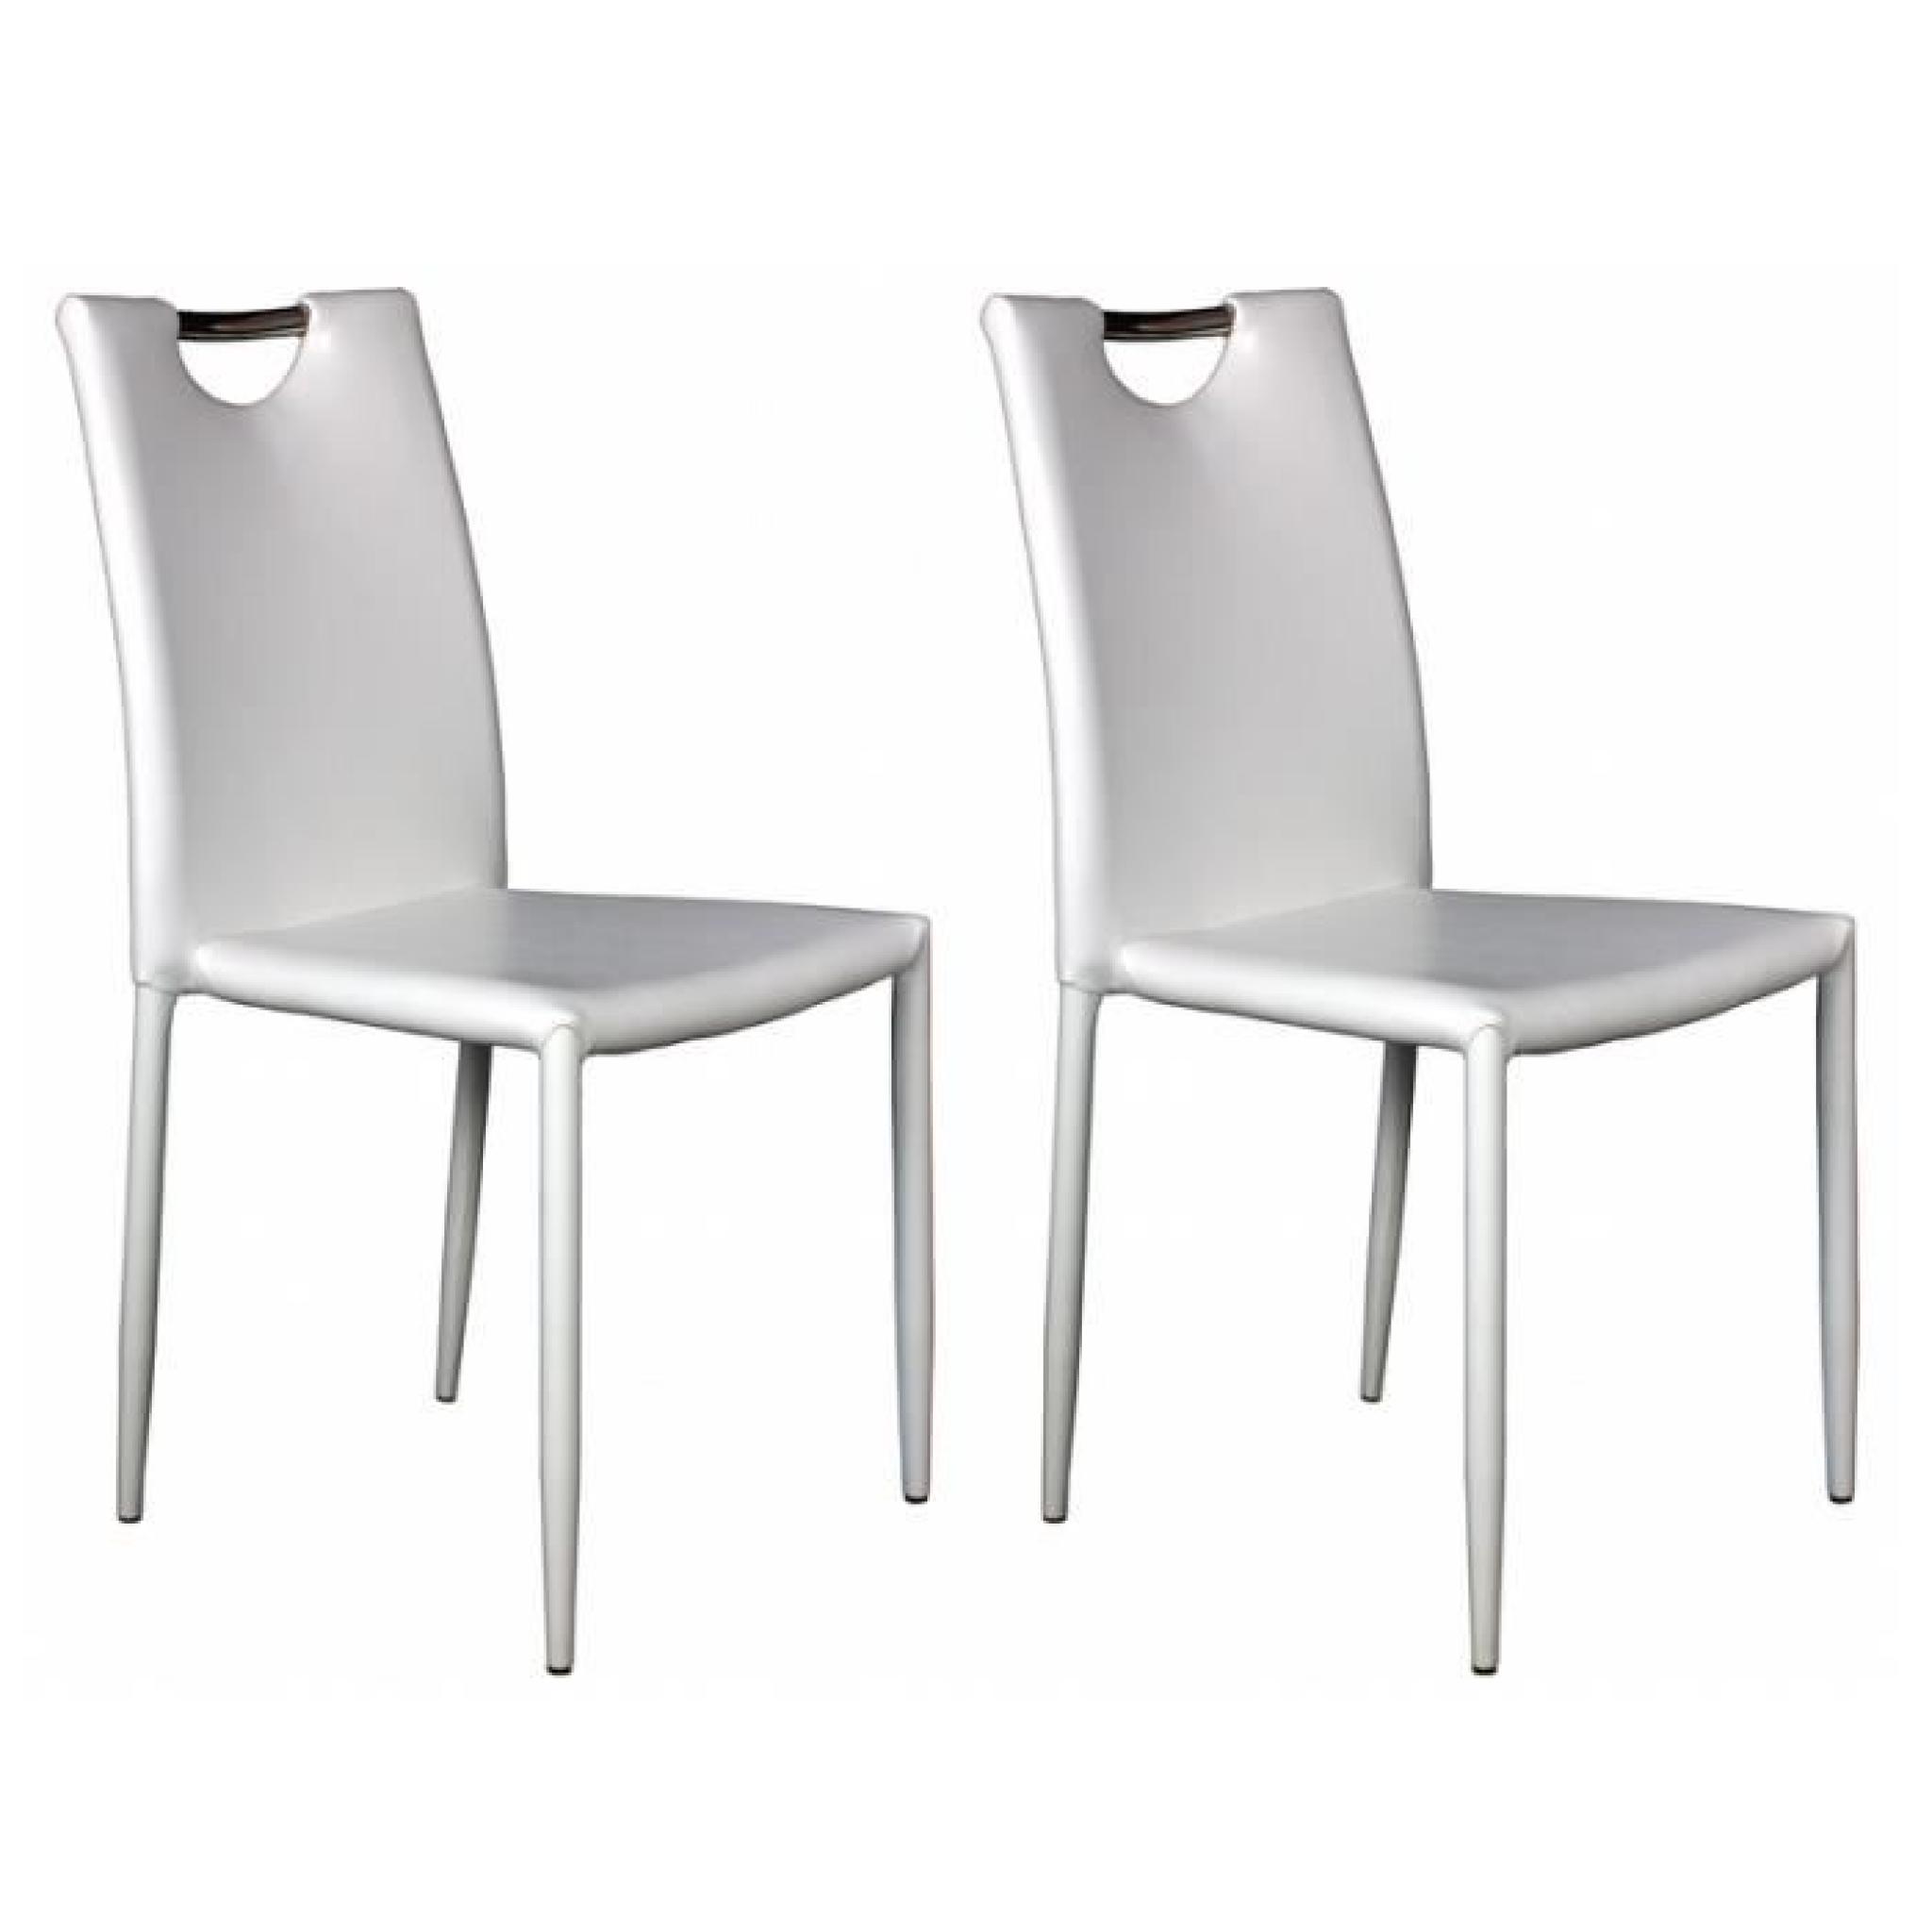 Kira - Lot 2 Chaises Blanches